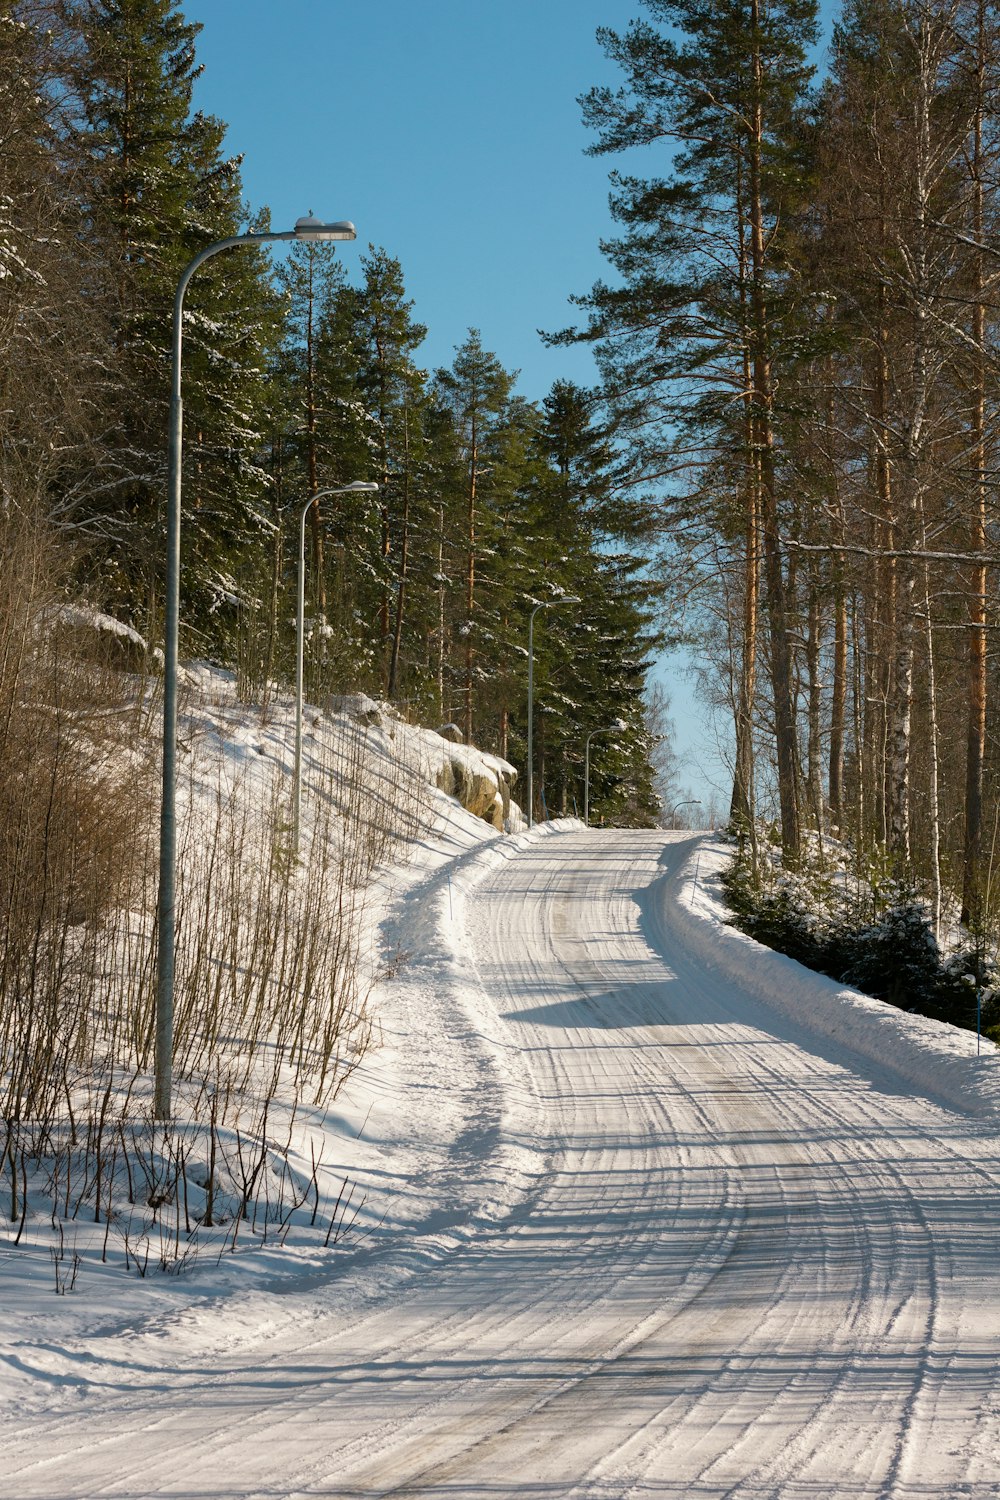 a snowy road in the middle of a forest